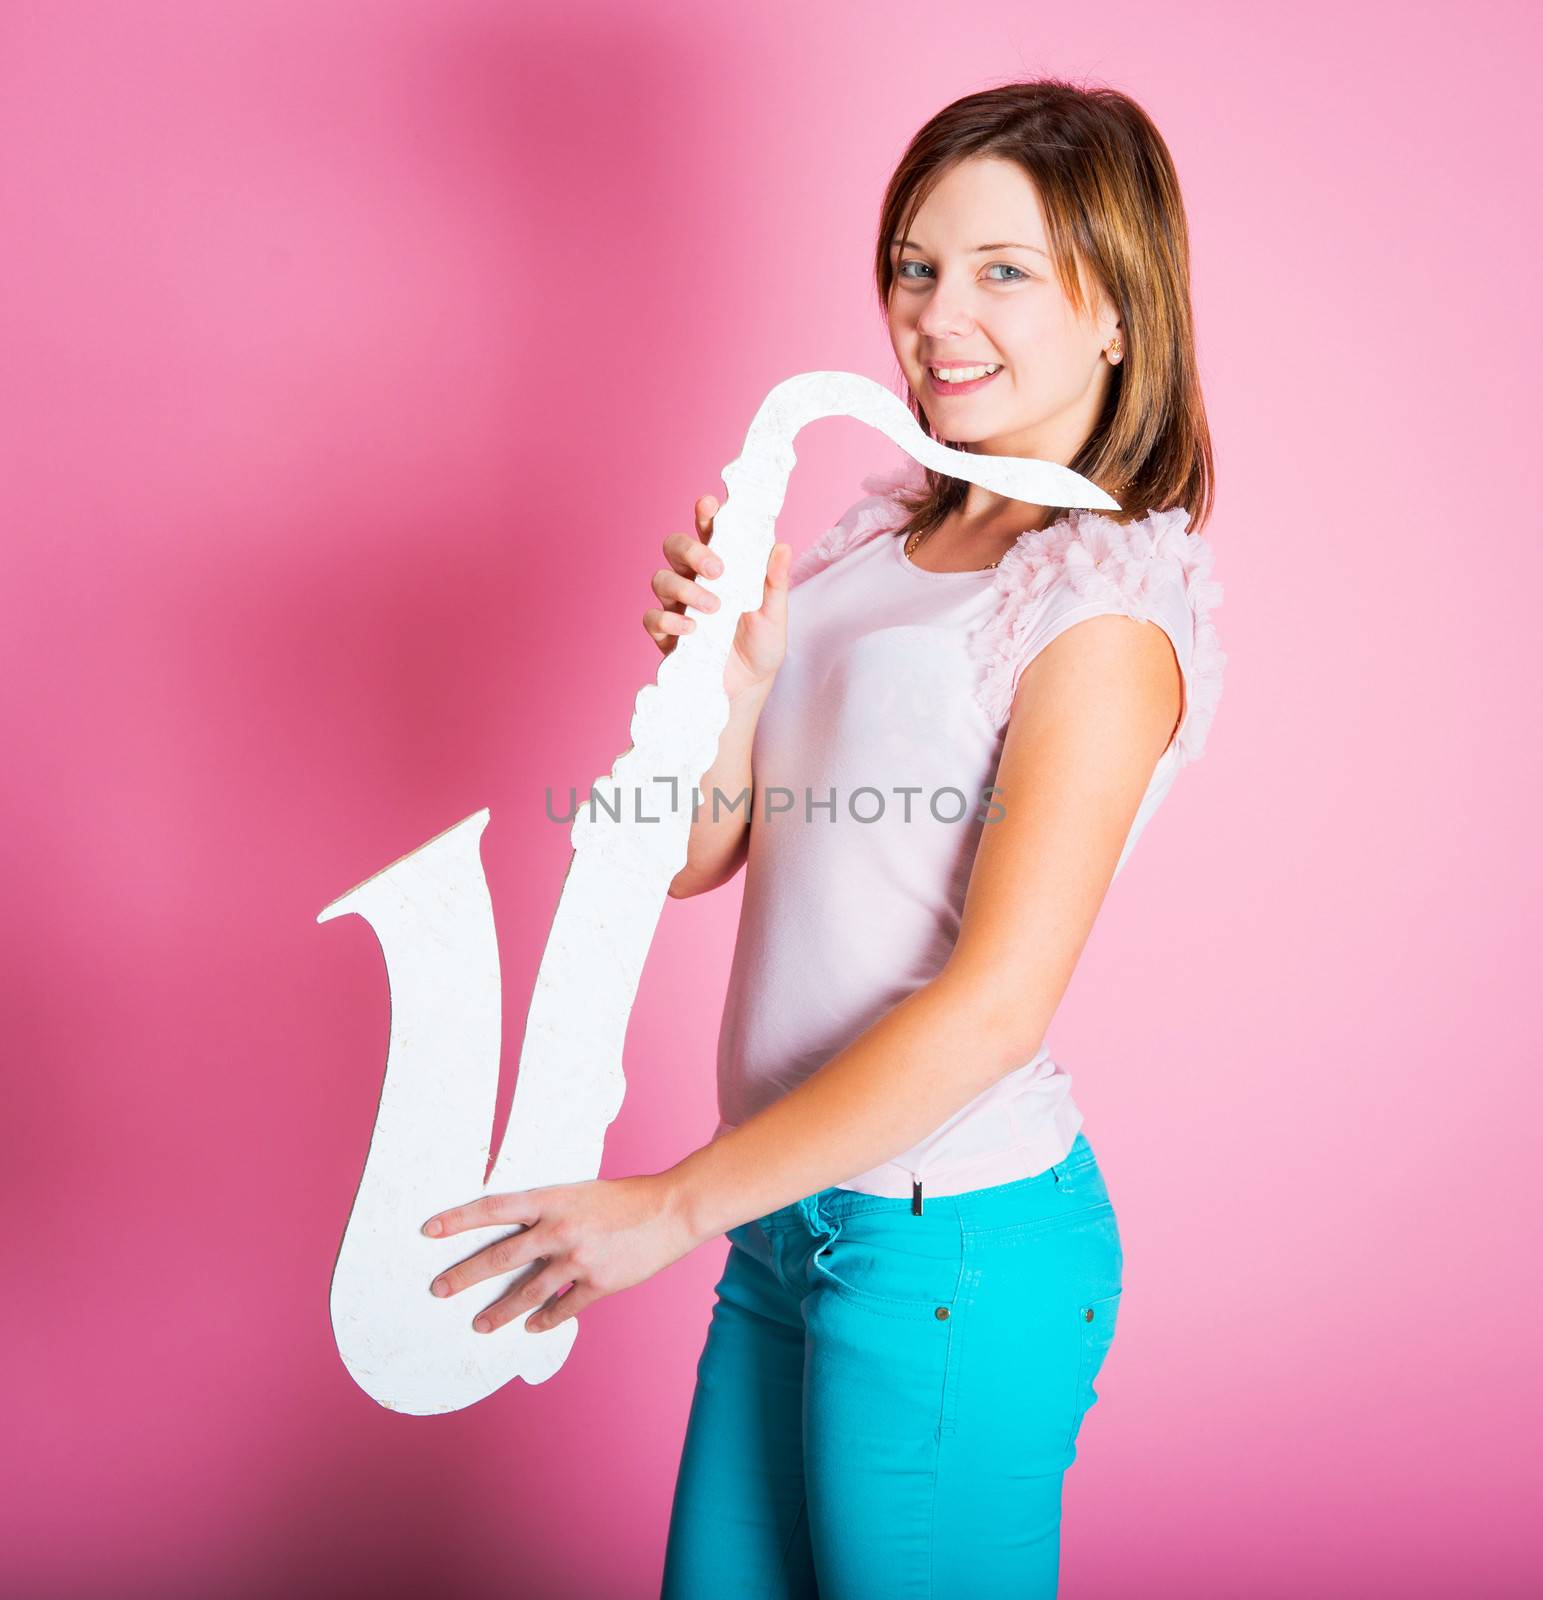 girl with white saxophone on a pink background